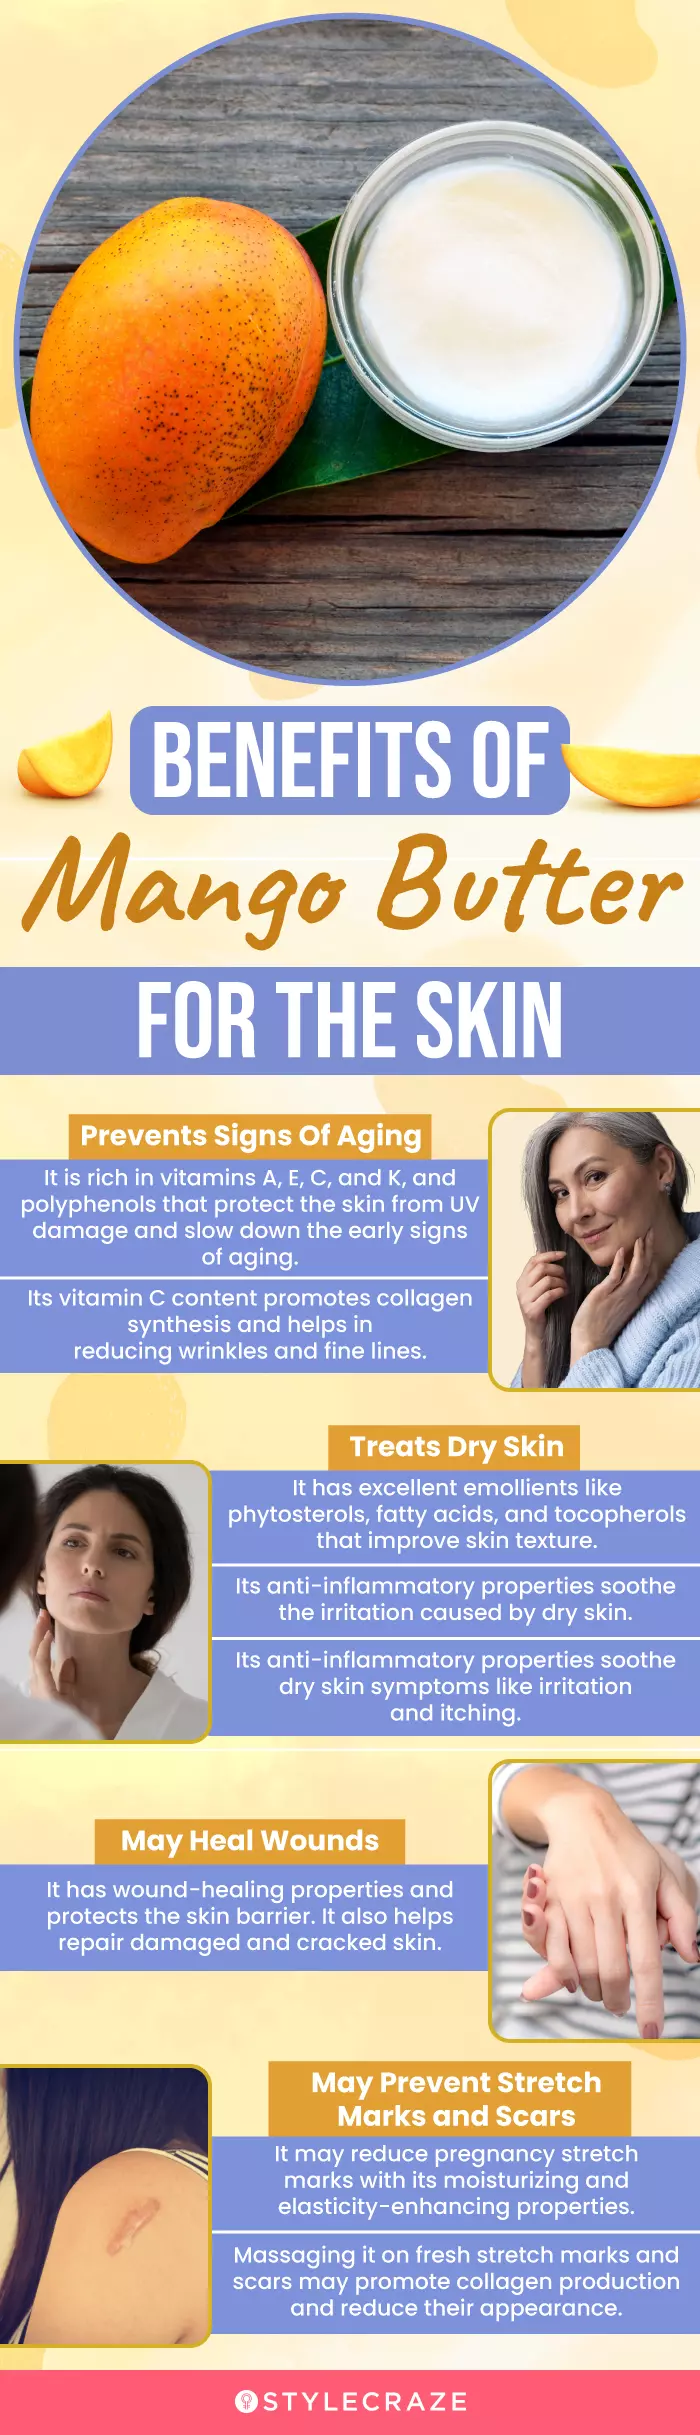 benefits of mango butter for the skin (infographic)